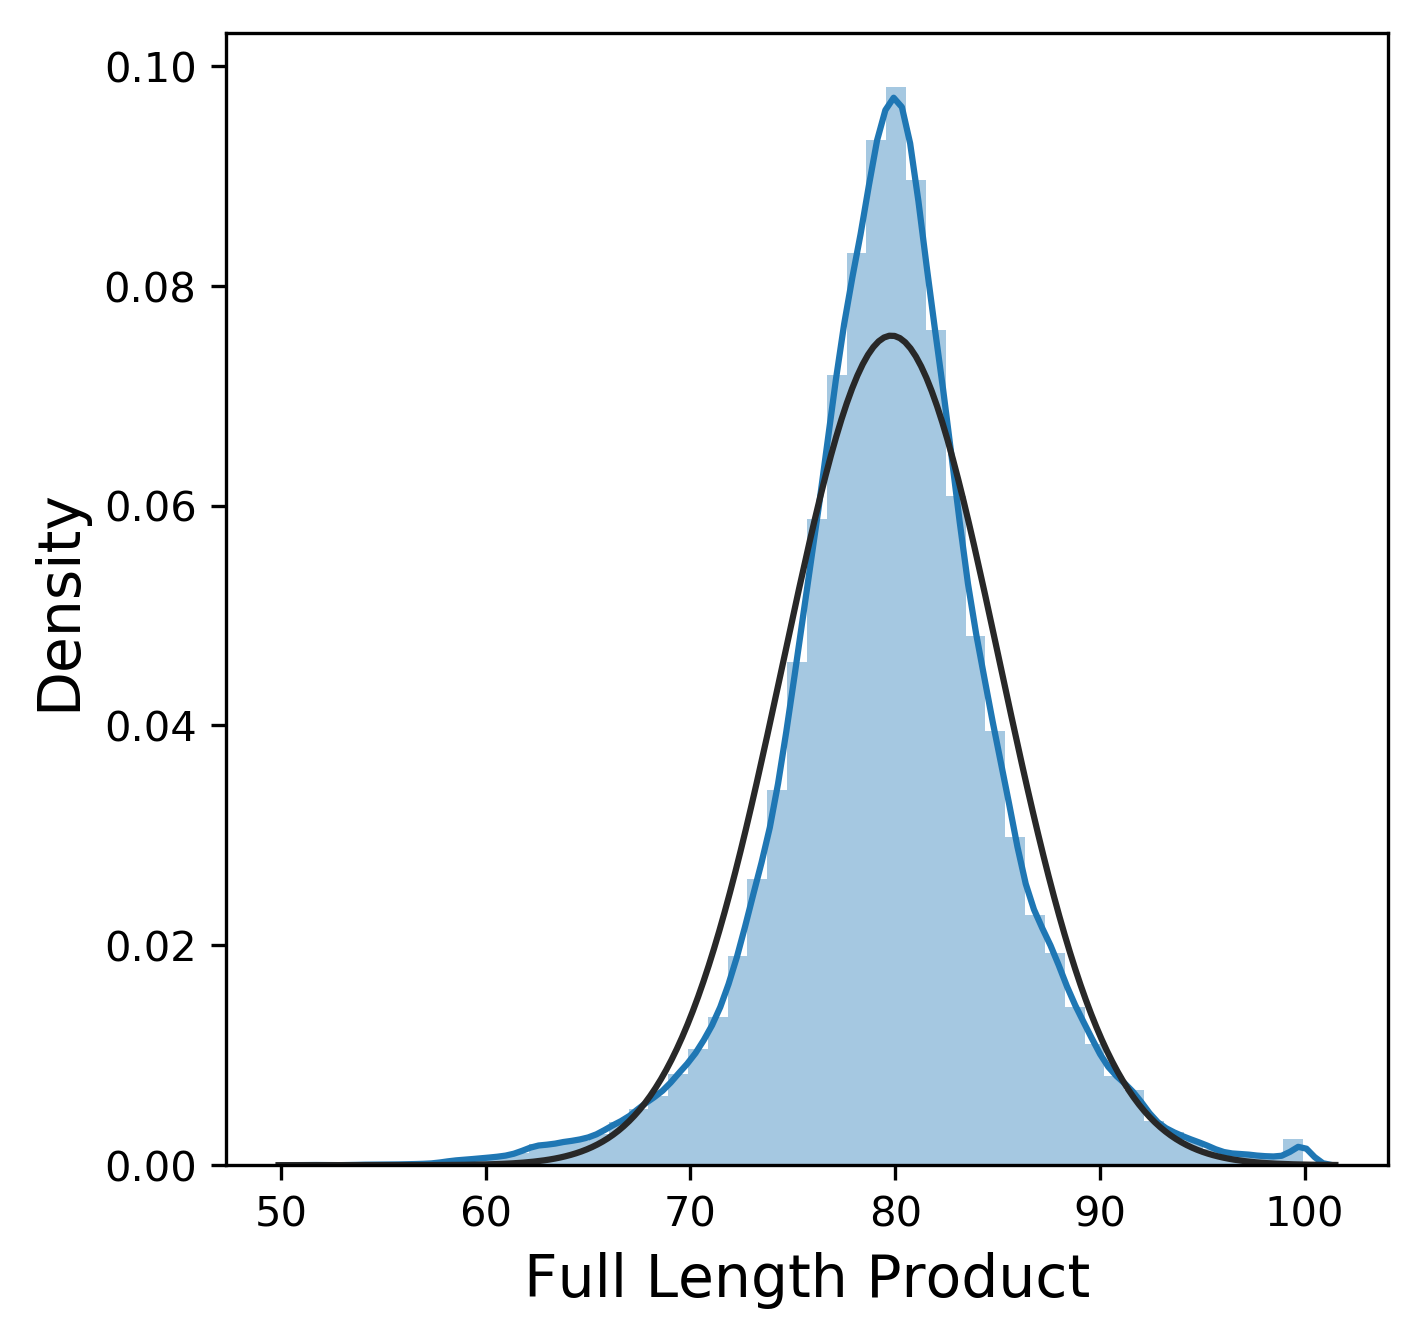 Distribution of the full length product